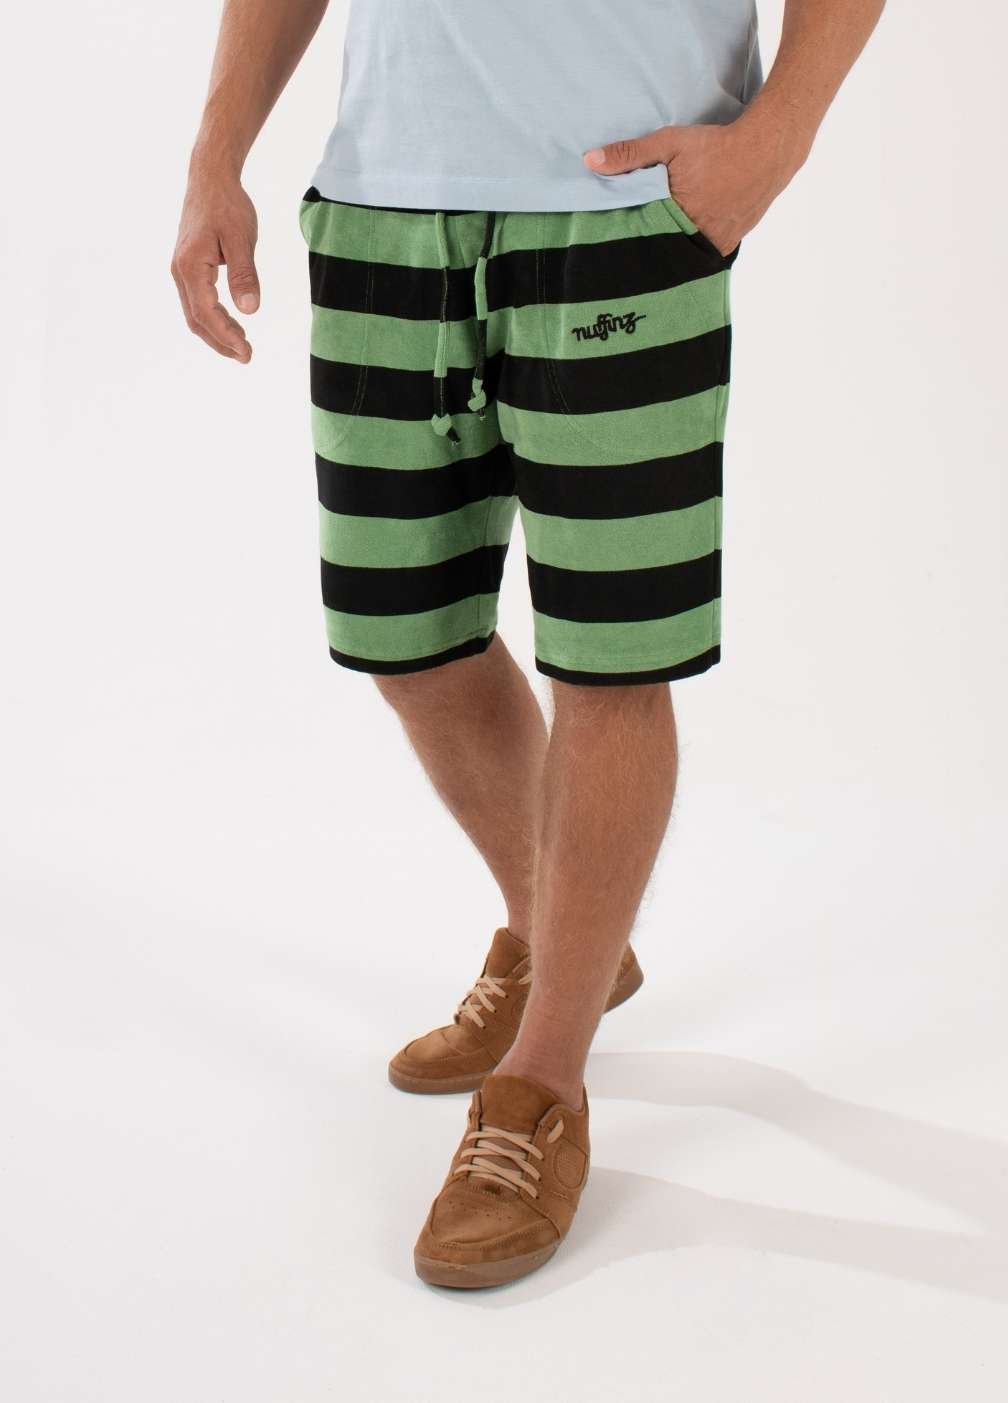 nuffinz striped shorts - STONE GREEN TOWEL SHORTS ST - 100% organic cotton - terry cloth - comfortable shorts for men - closeup side / front